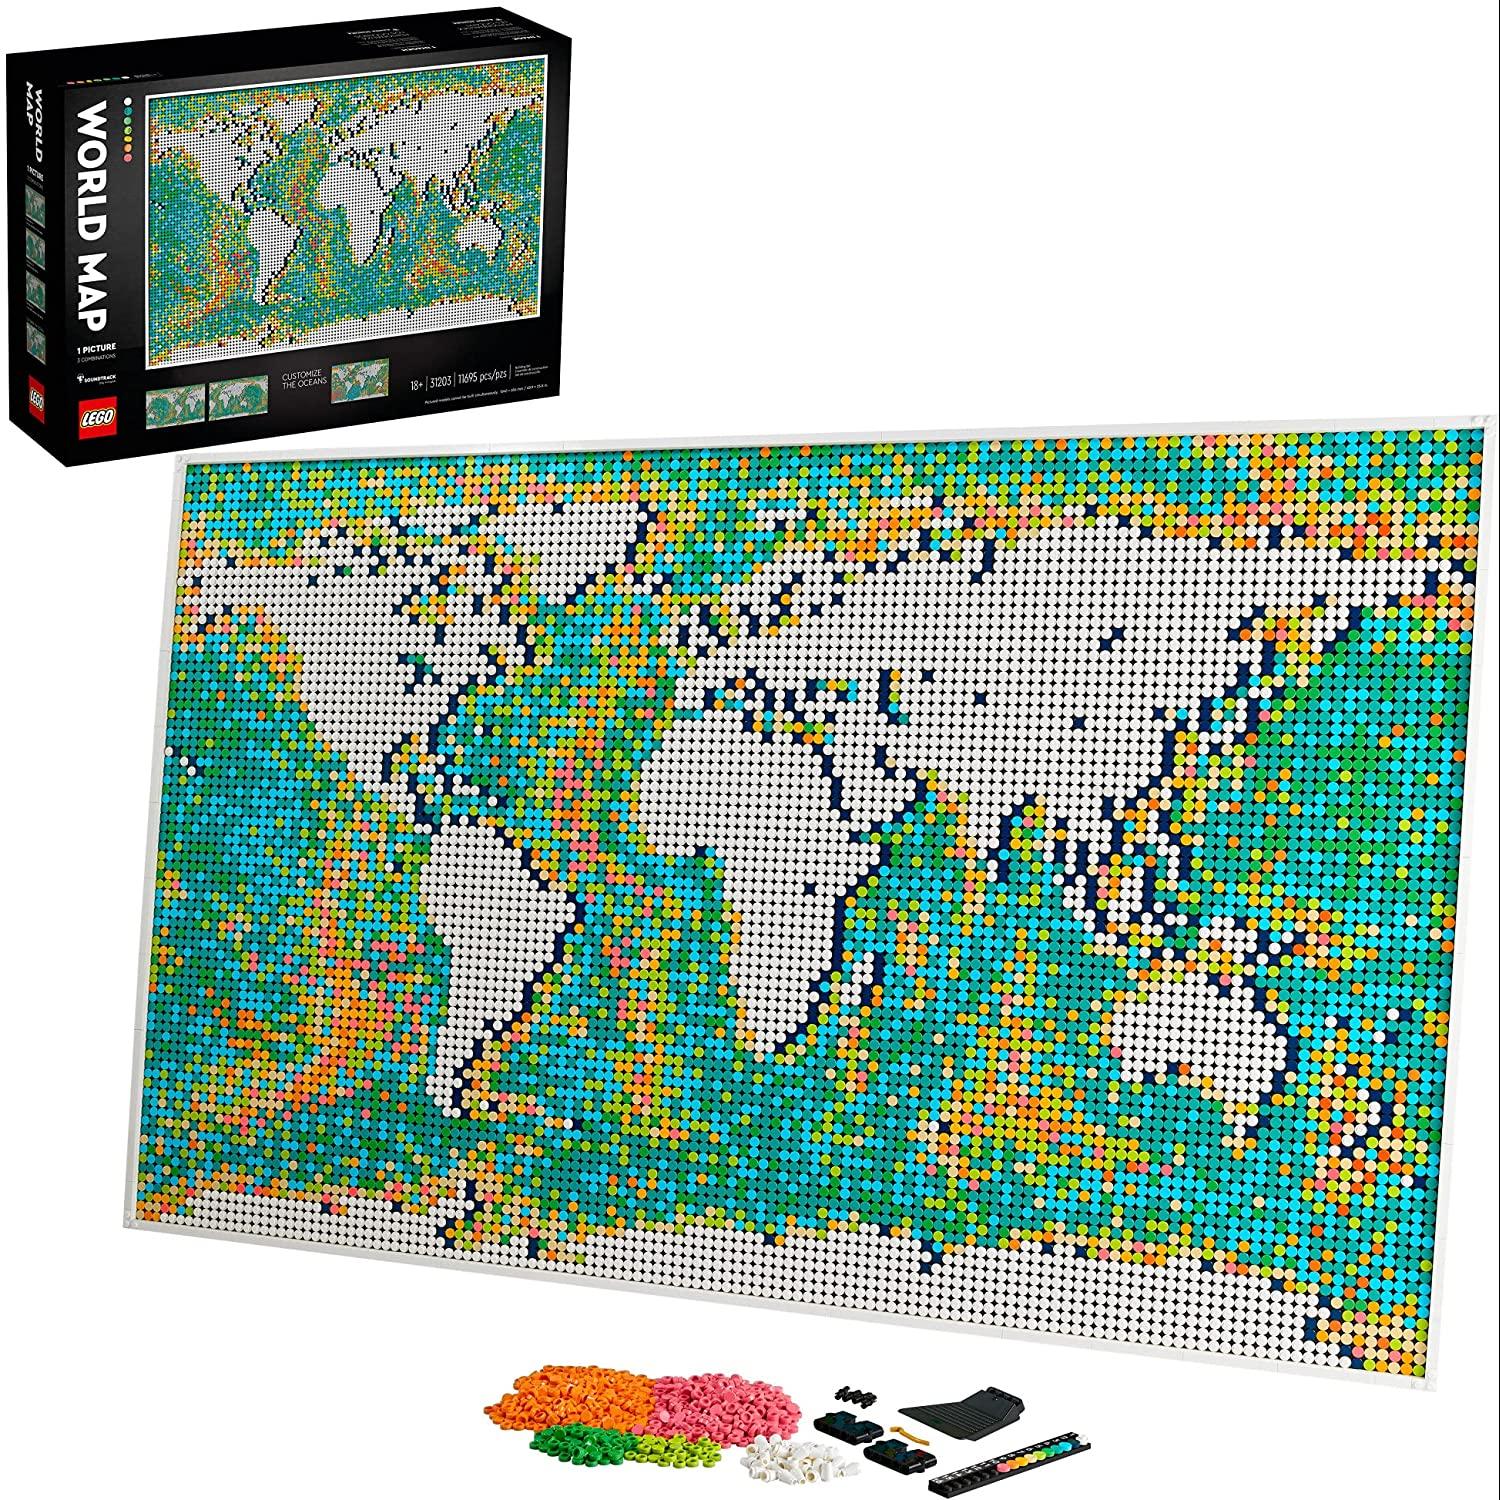 LEGO Art World Map 31203 for $211.99 Shipped